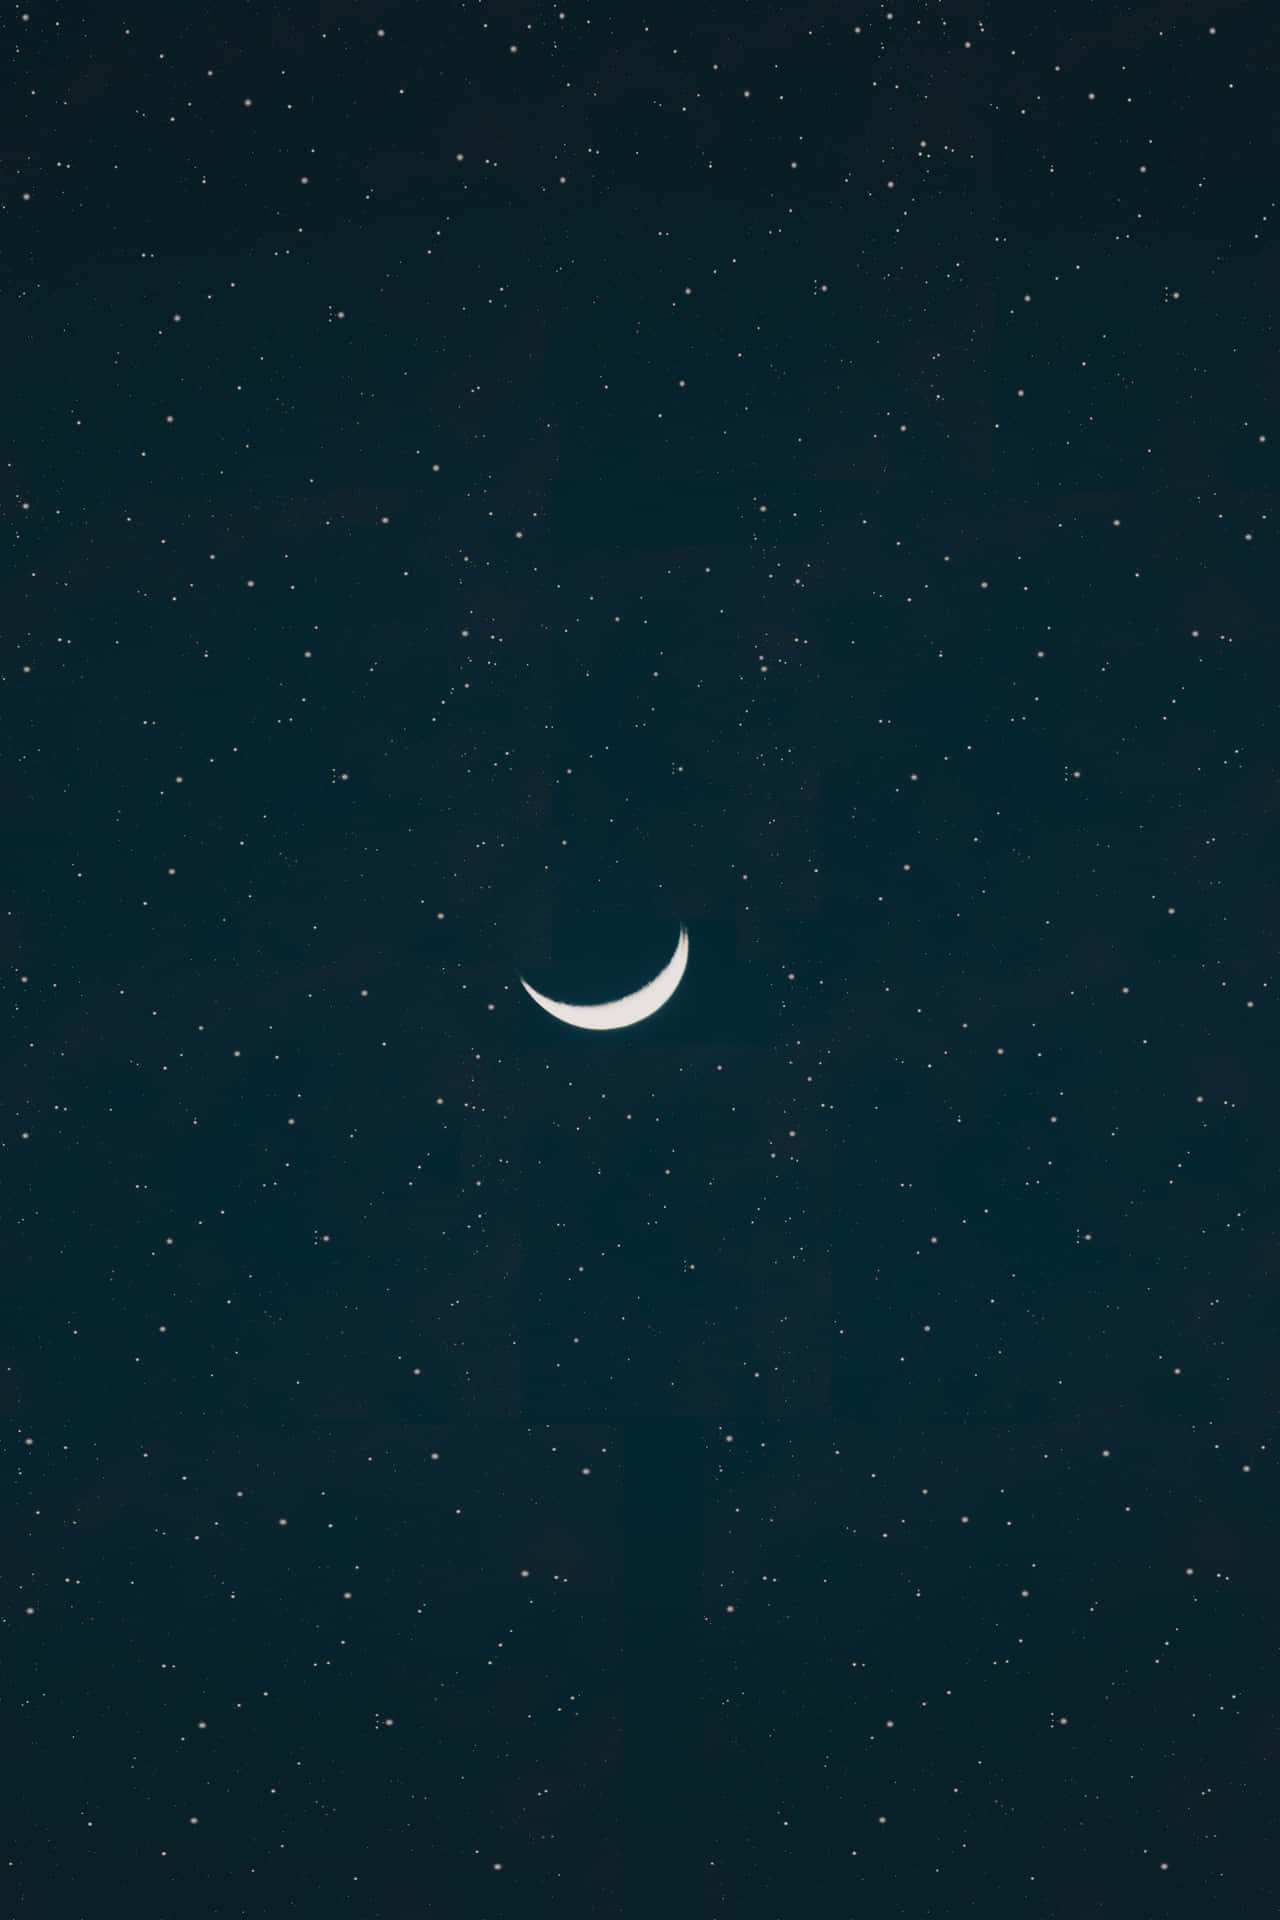 A Crescent In The Sky With Stars Background